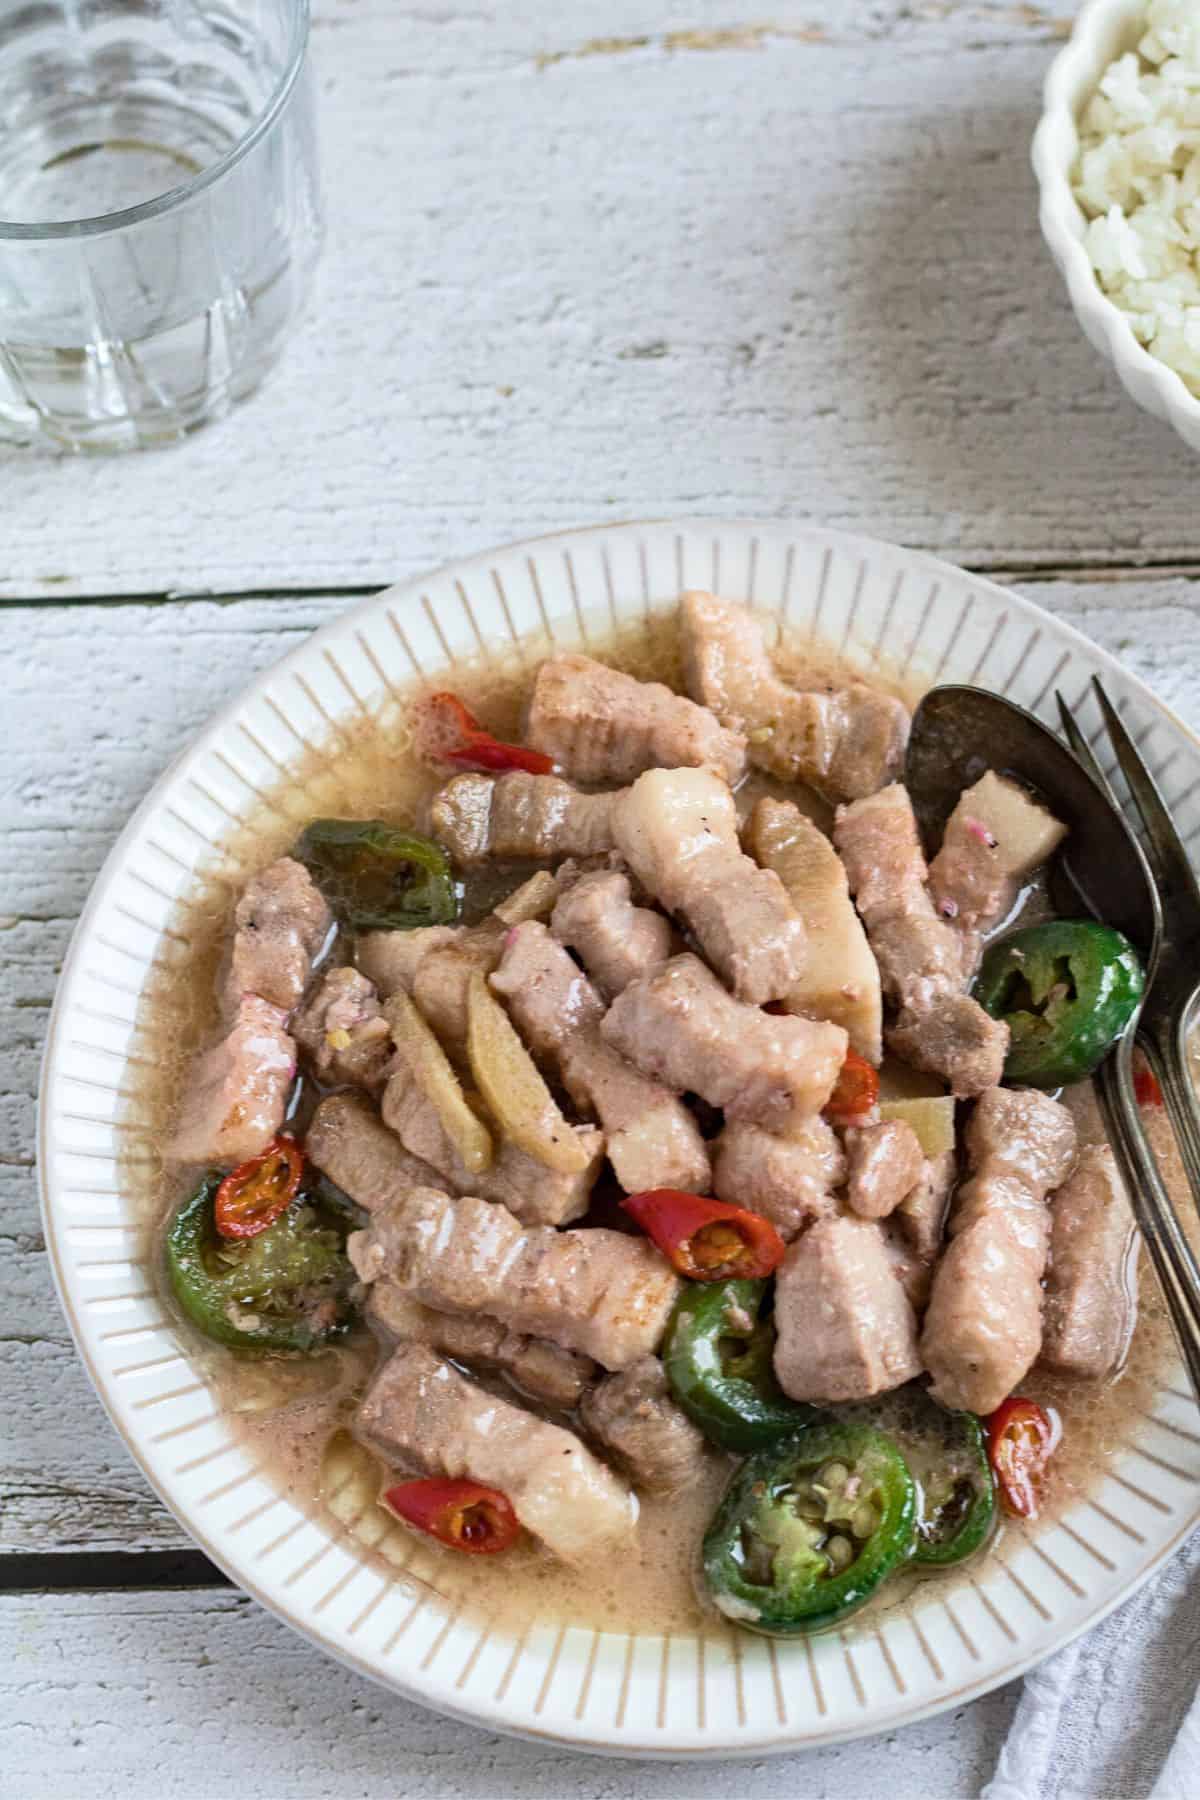 Finish dish of bicol express in a plate with spoon and fork.